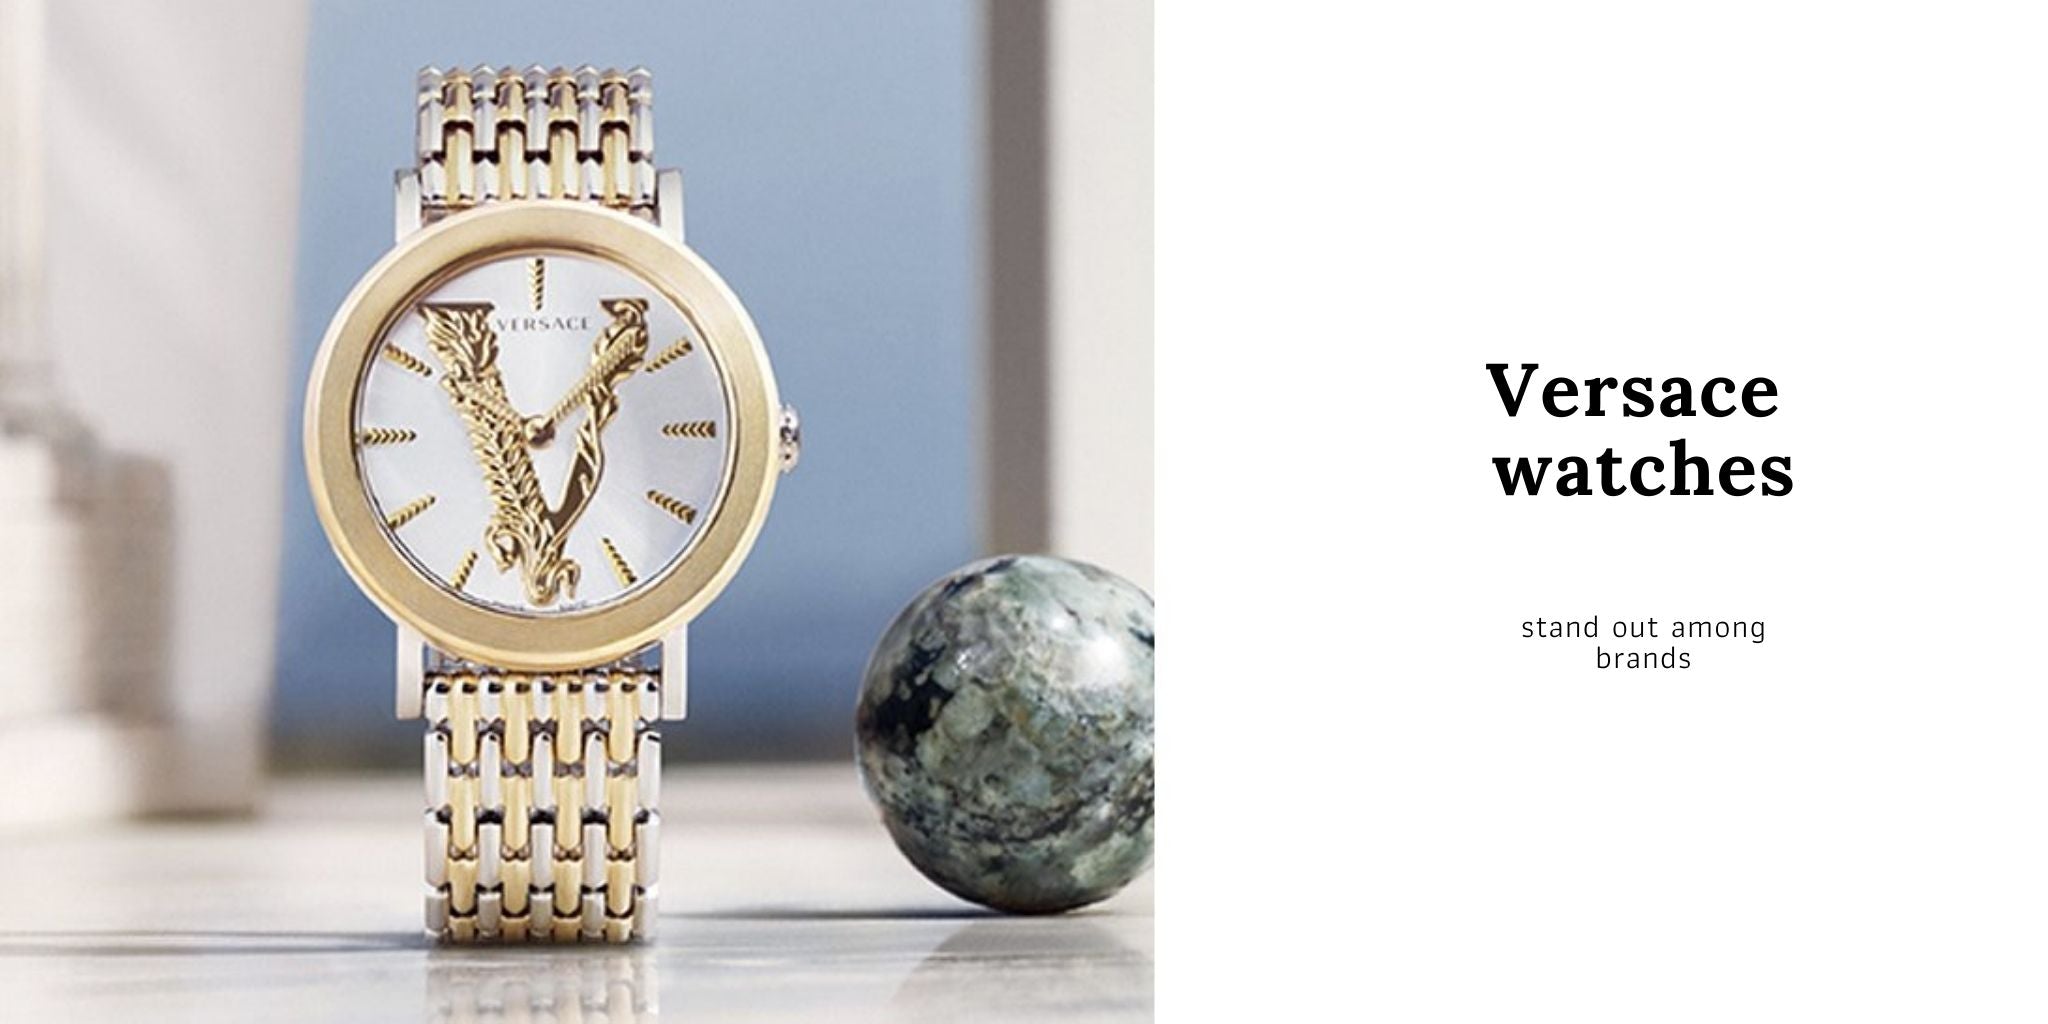 Versace watches stand out among brands